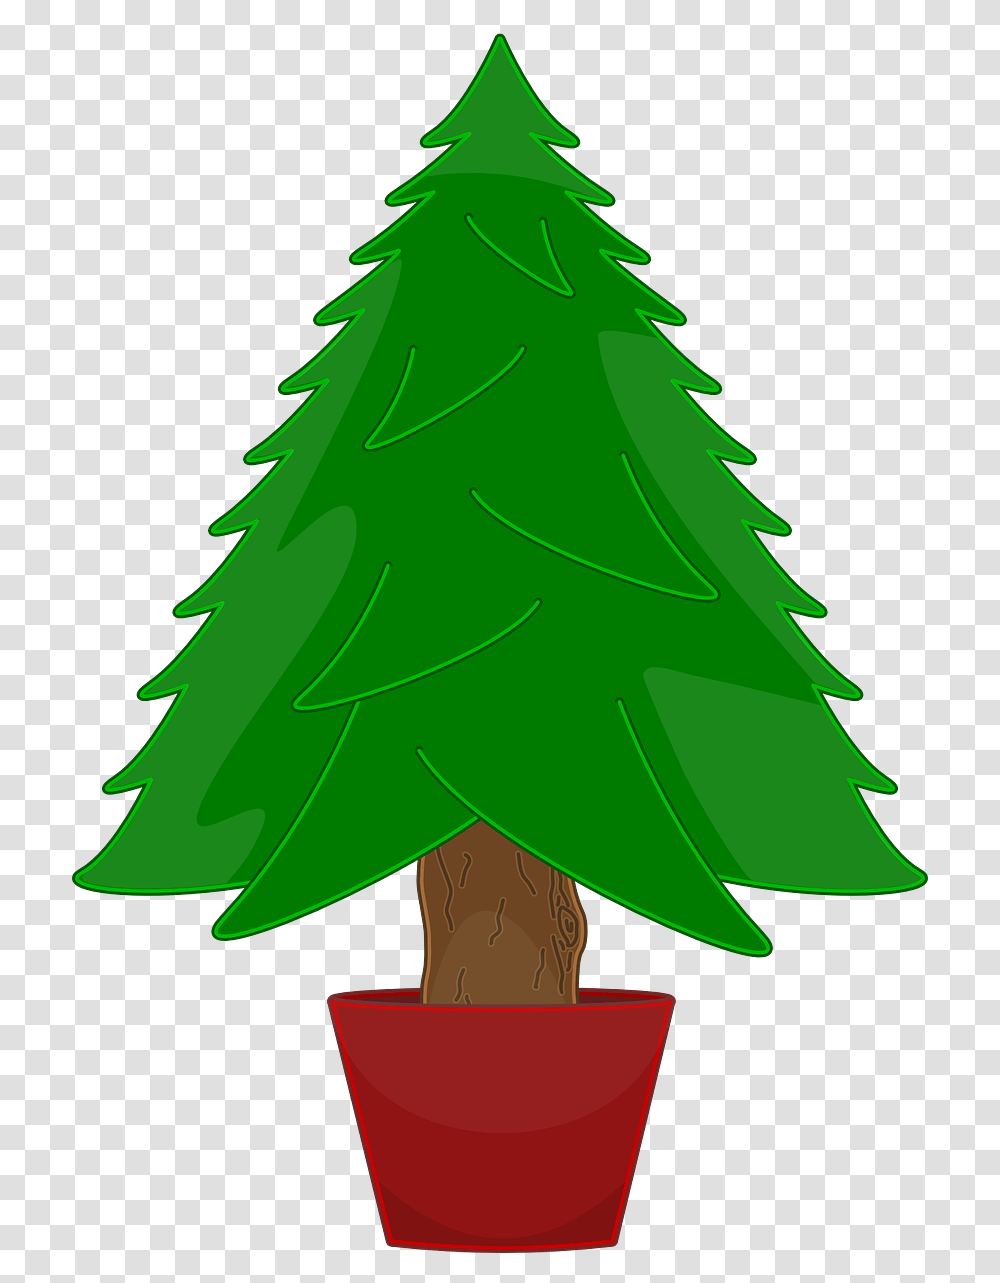 Bare Christmas Tree Clip Art Christmas Tree Not Decorated, Plant, Ornament, Star Symbol Transparent Png